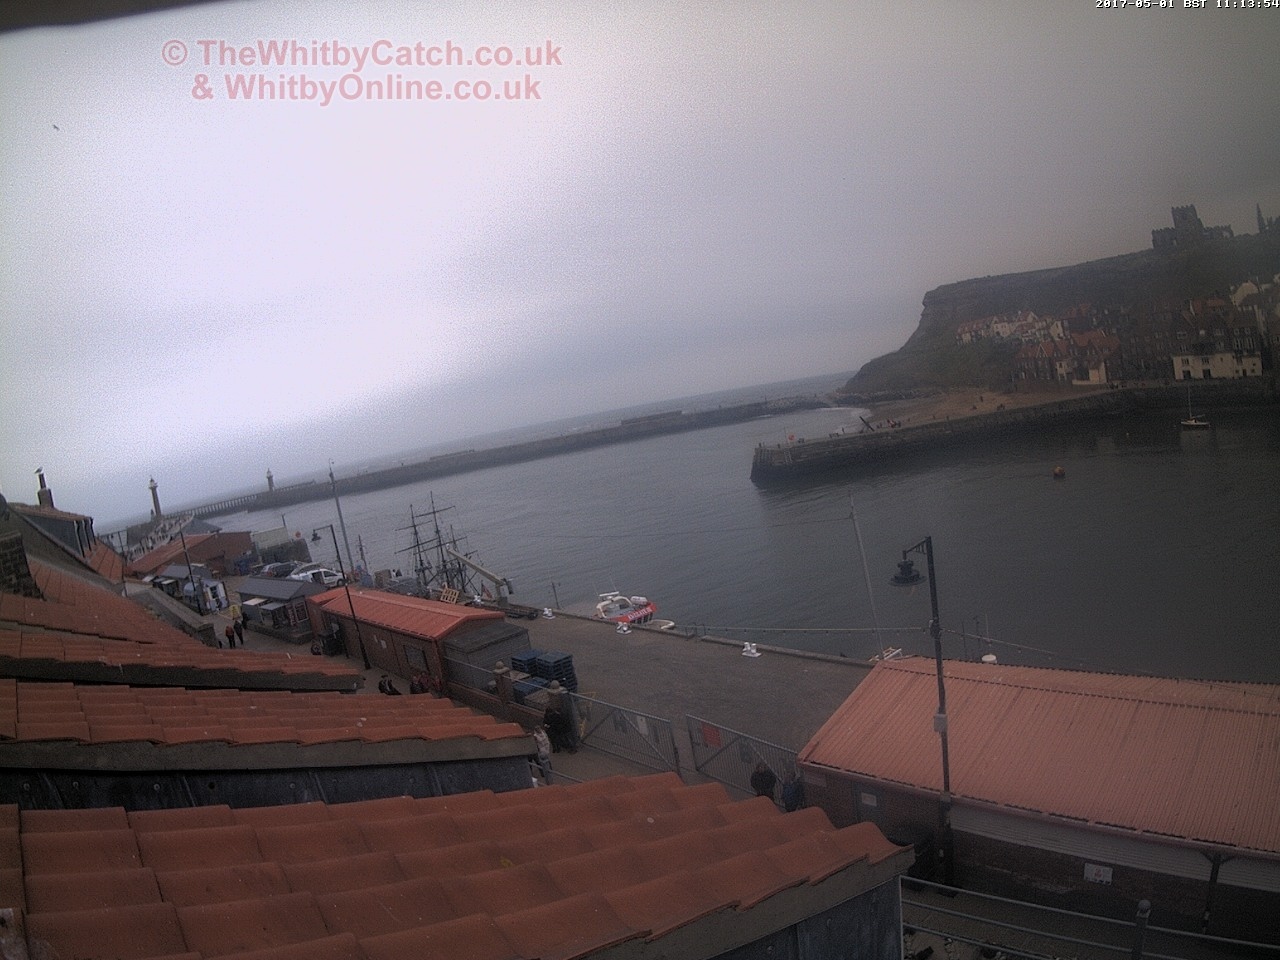 Whitby Mon 1st May 2017 11:14.